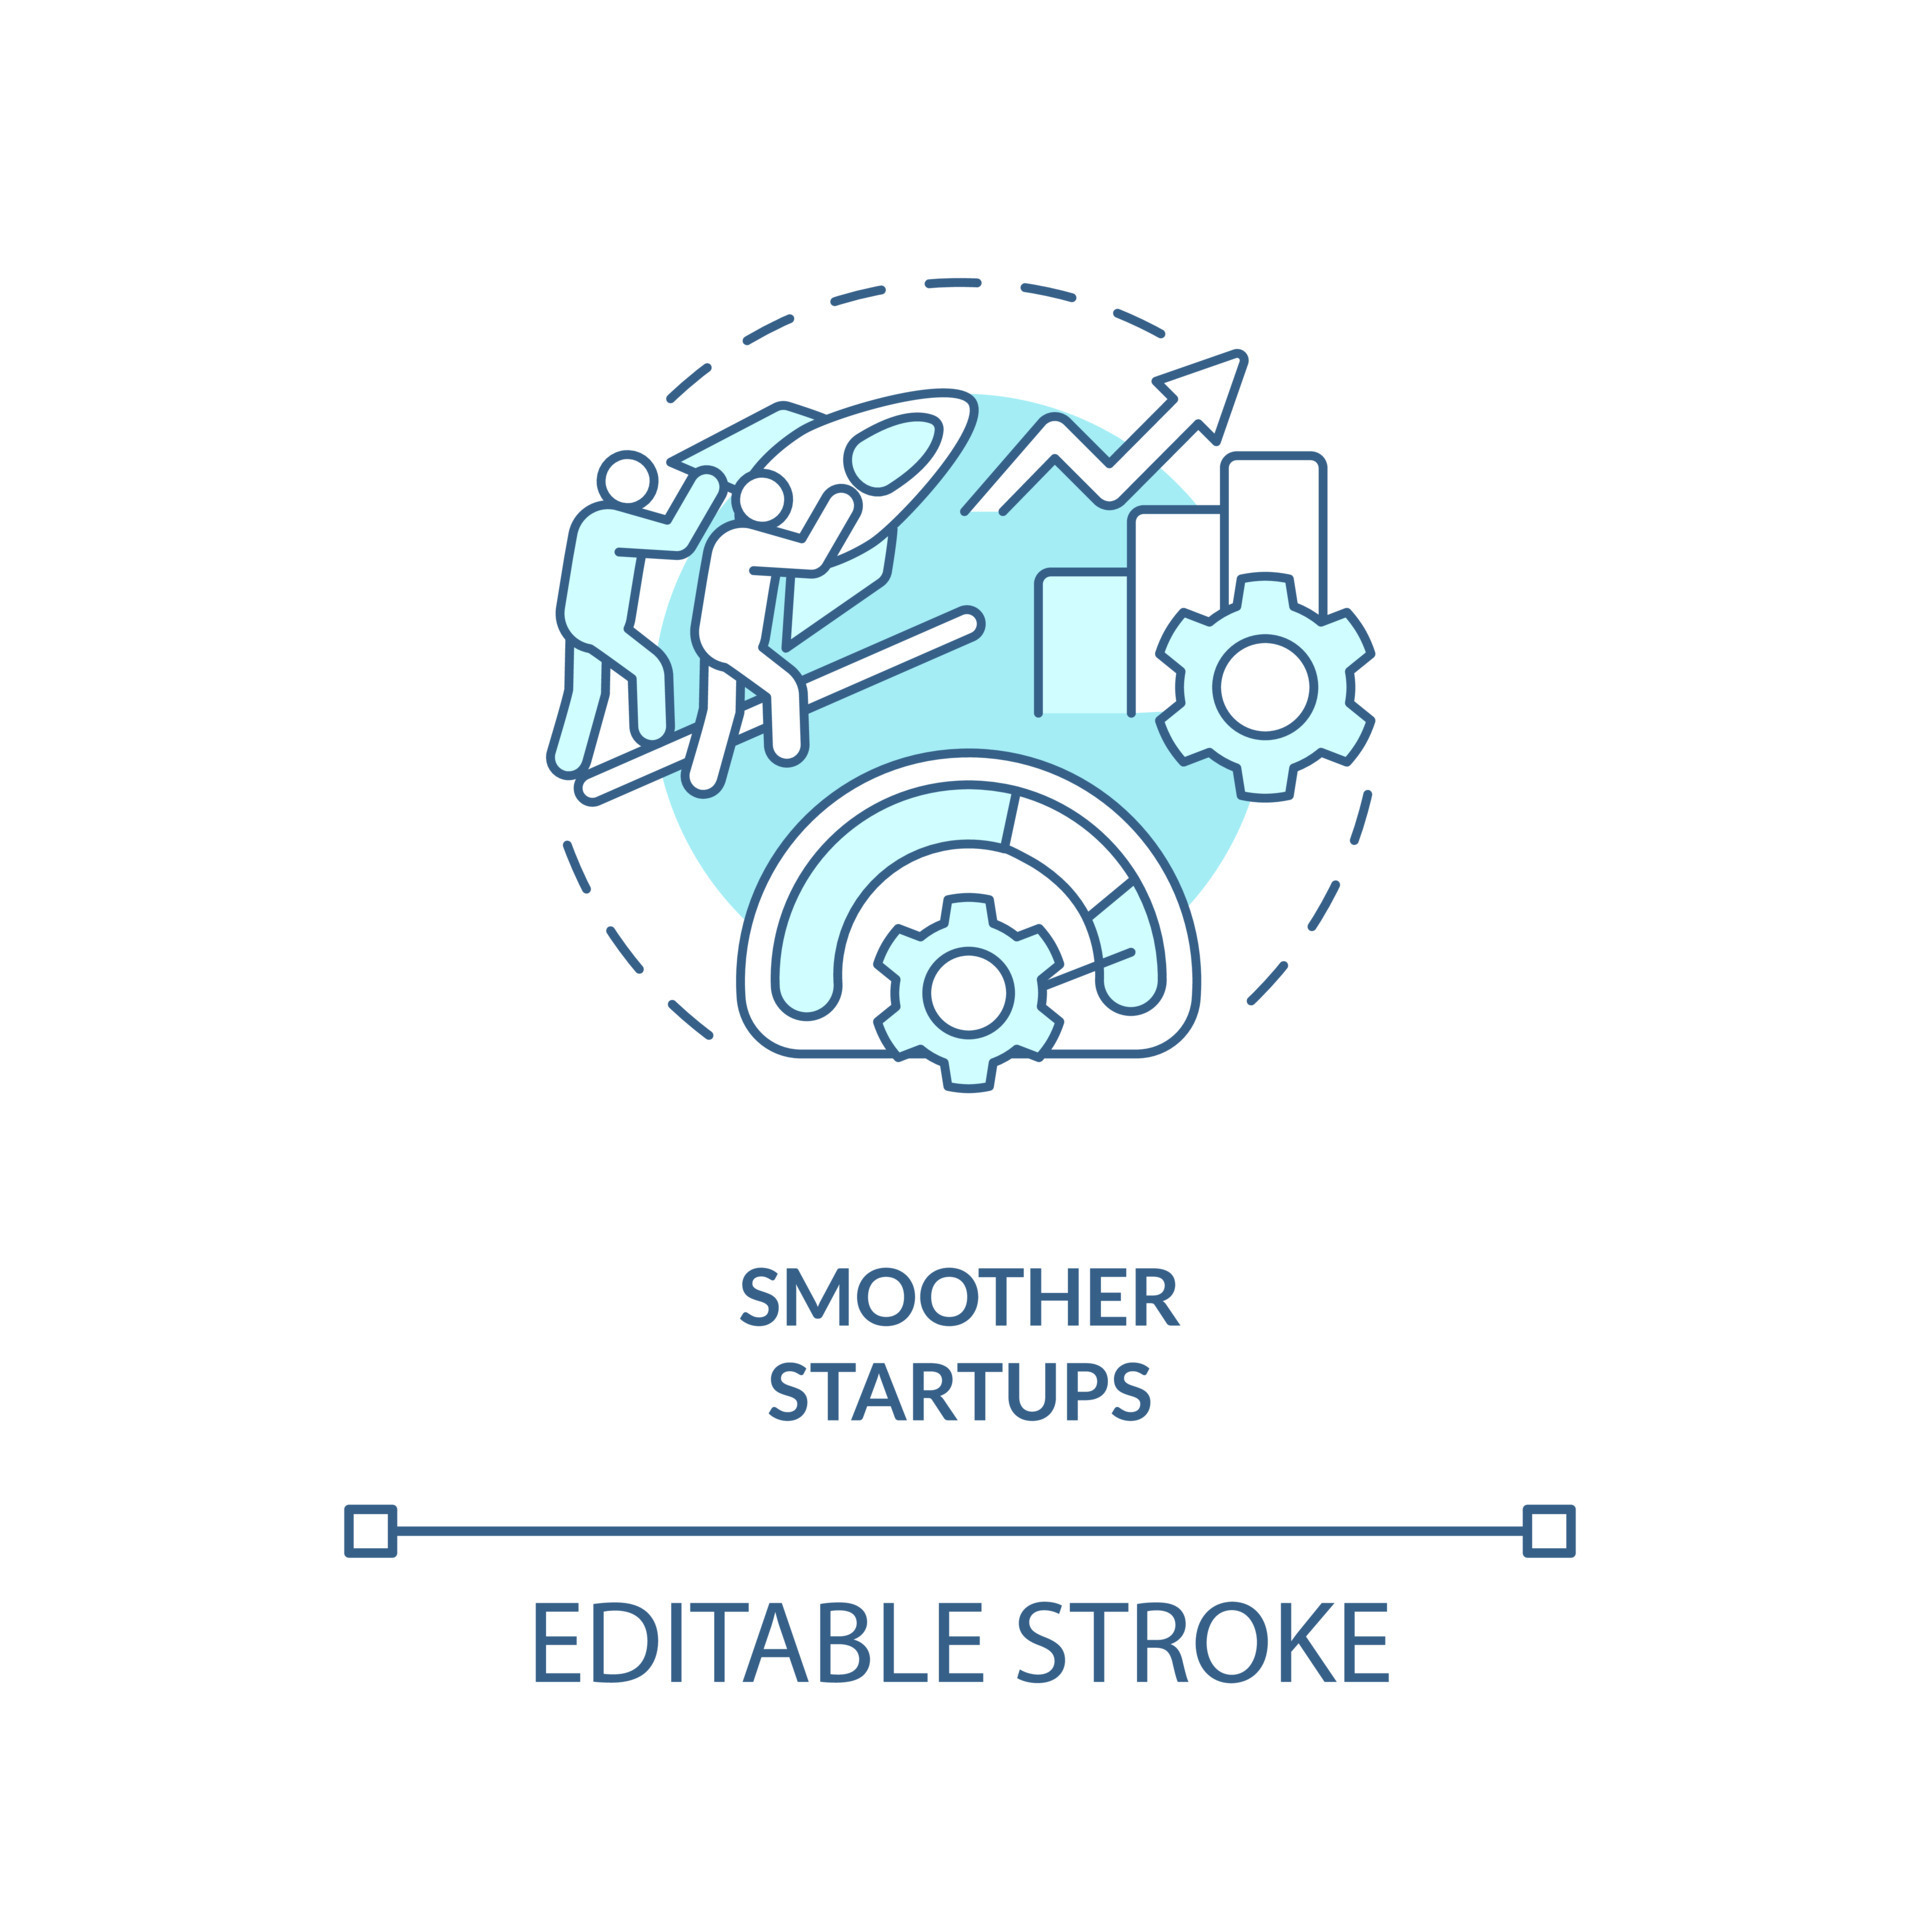 Smoother startups turquoise concept icon. Standardized changeover ...